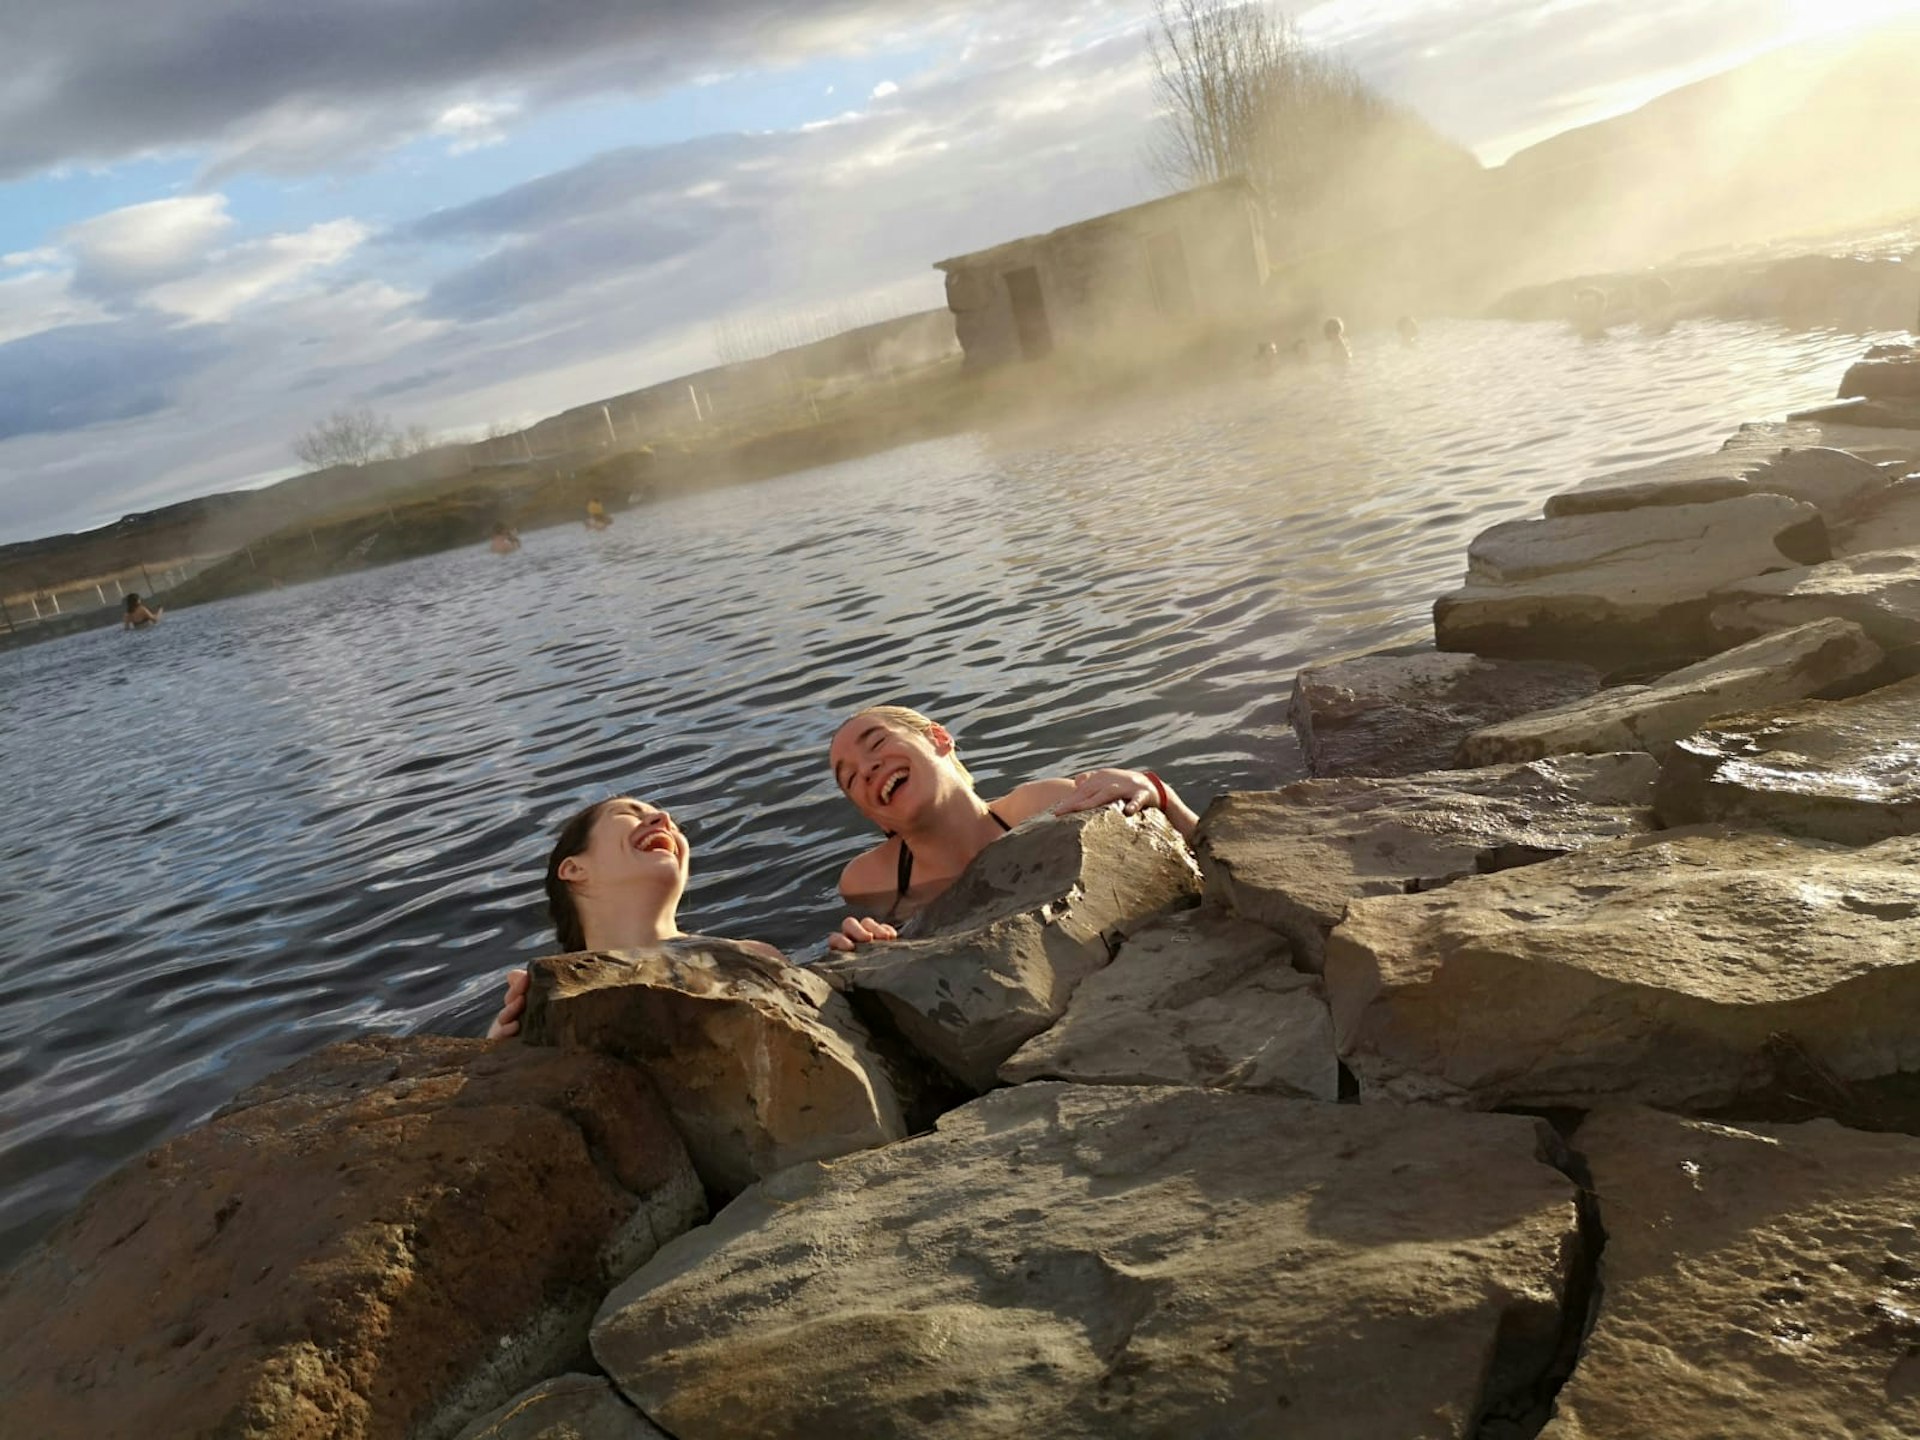 Two women are in a lagoon, resting against some rocks on the side. They both have their heads thrown back in laughter.